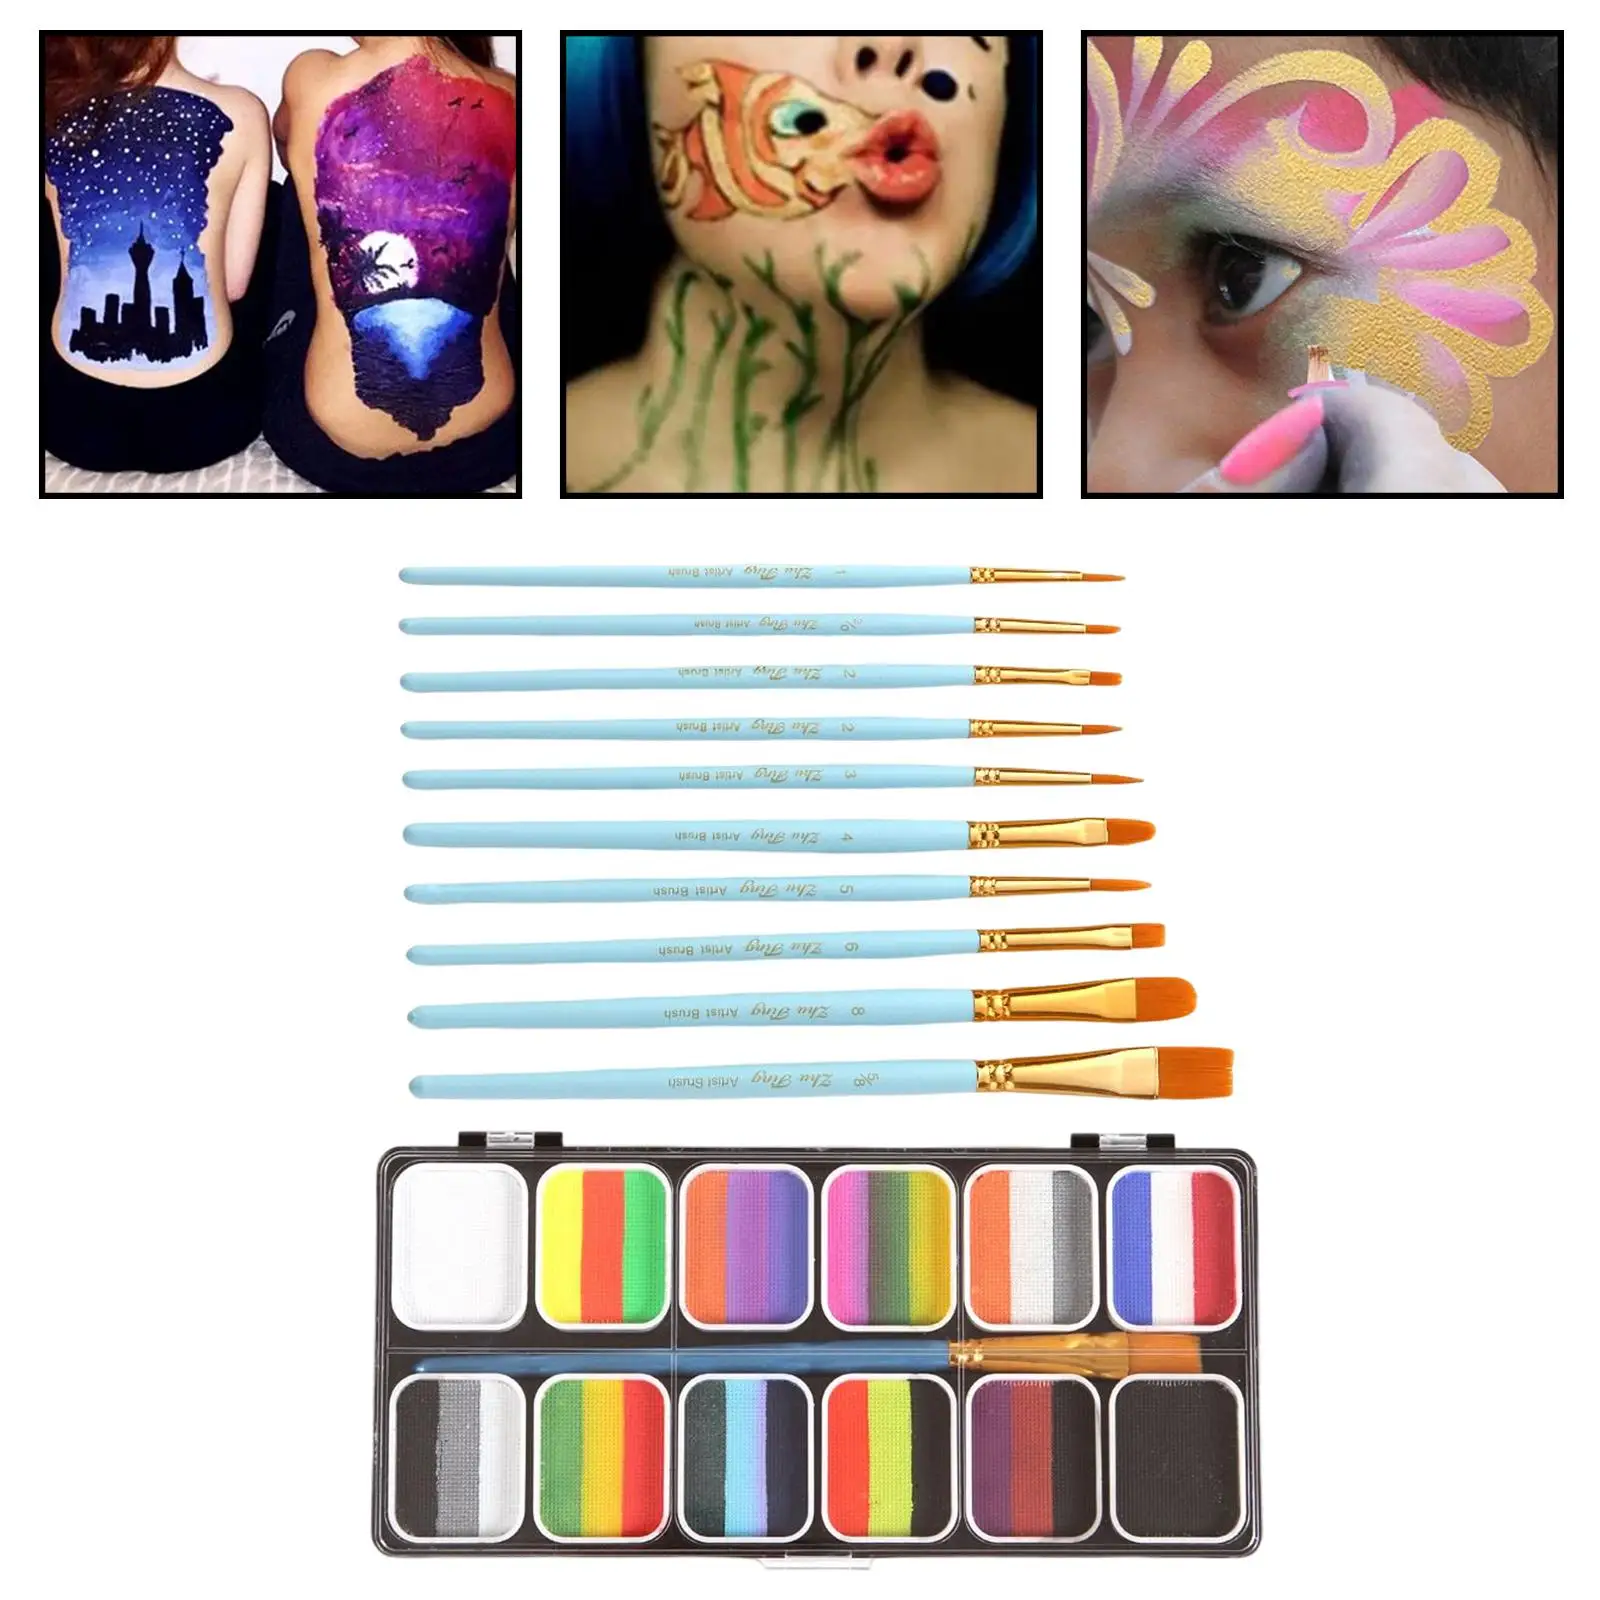 Face Body Paint Facepaints with Brushes Washable Professional Cosmetic Makeup Palette for Halloween Stage Performance Holiday